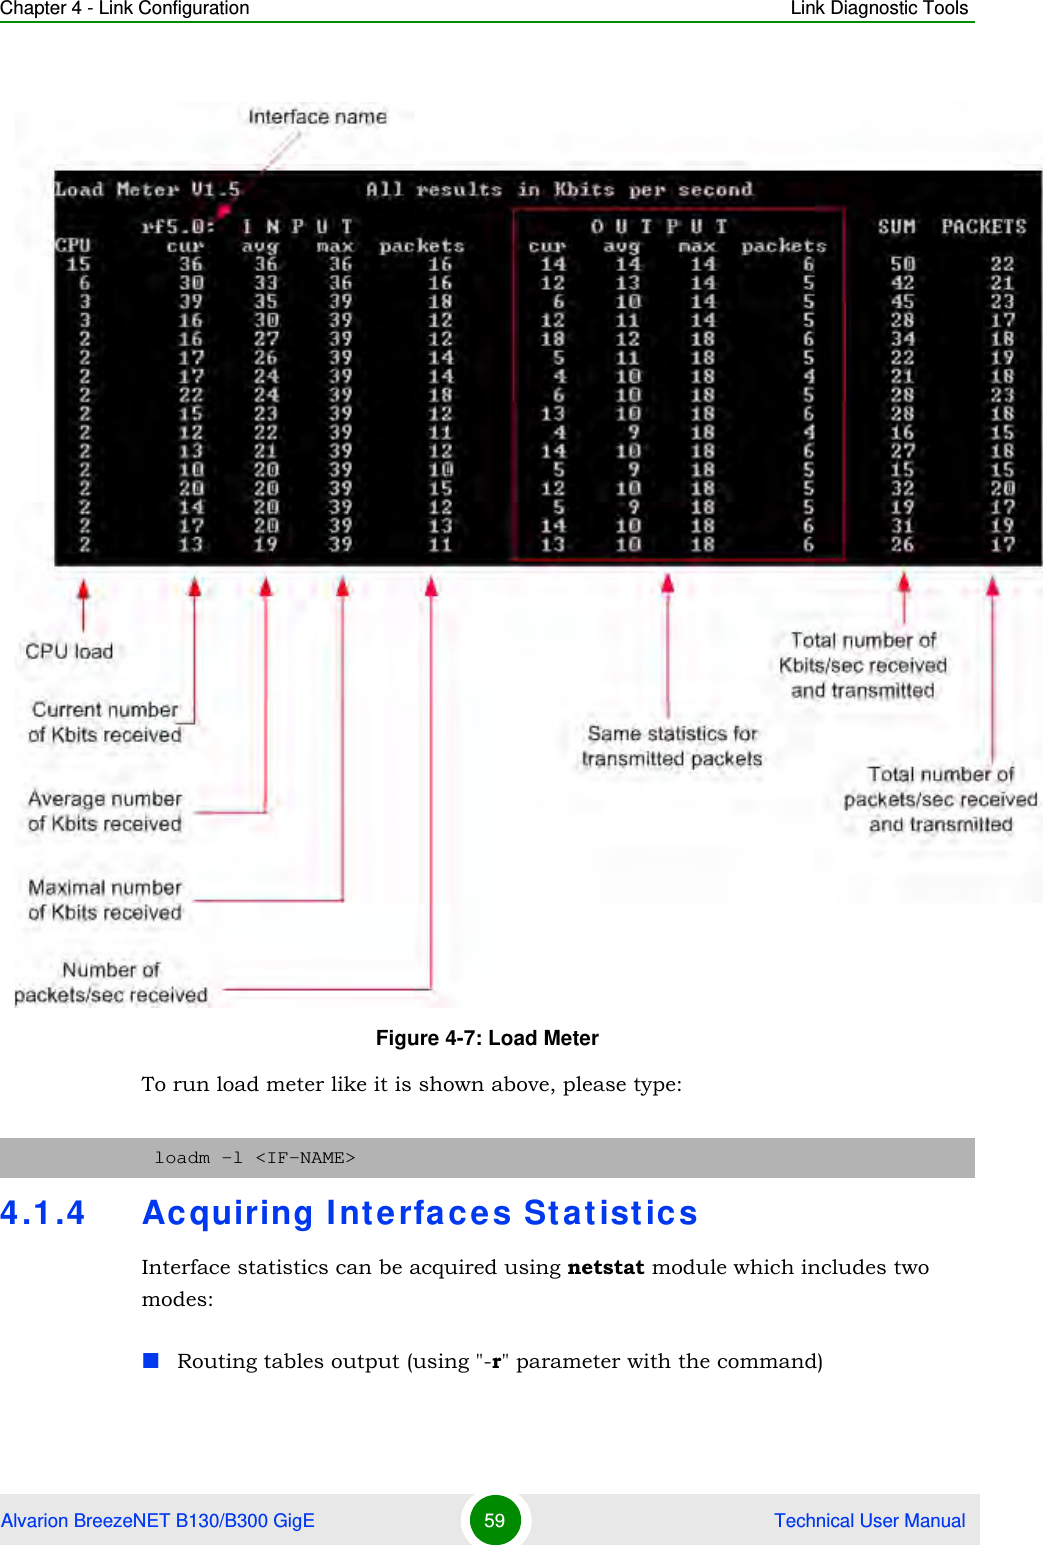 Chapter 4 - Link Configuration Link Diagnostic ToolsAlvarion BreezeNET B130/B300 GigE 59  Technical User ManualTo run load meter like it is shown above, please type:4.1.4 Acquiring Interfaces StatisticsInterface statistics can be acquired using netstat module which includes two modes:Routing tables output (using &quot;-r&quot; parameter with the command)Figure 4-7: Load Meterloadm -l &lt;IF-NAME&gt;